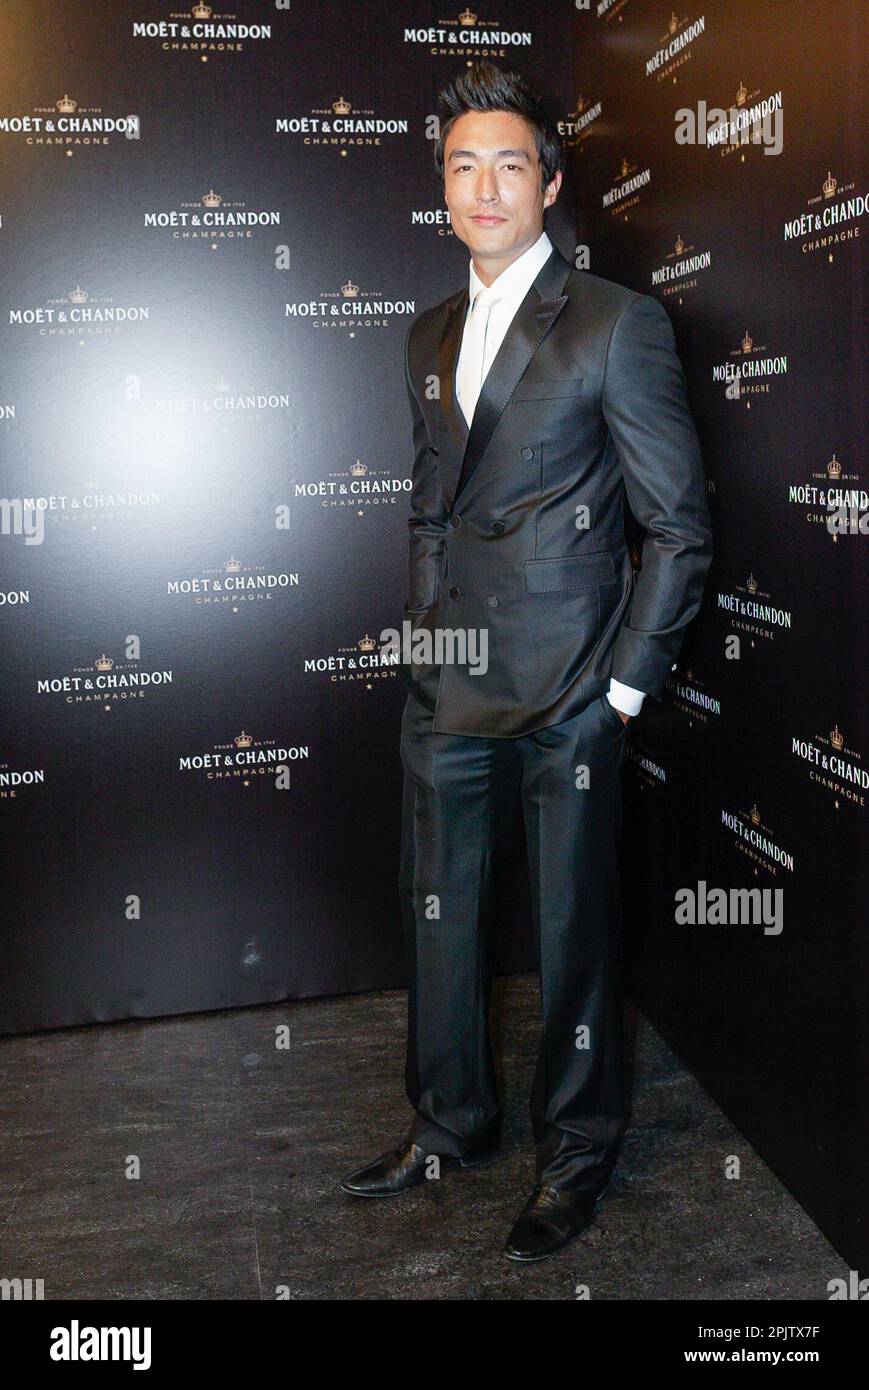 Daniel Phillip Henney, the US-actor based in South Korea, at the Moet & Chandon 'Vintage 2000' launch in the Overseas Passenger Terminal at Circular Quay in Sydney, Australia on 28 June 2007. Stock Photo